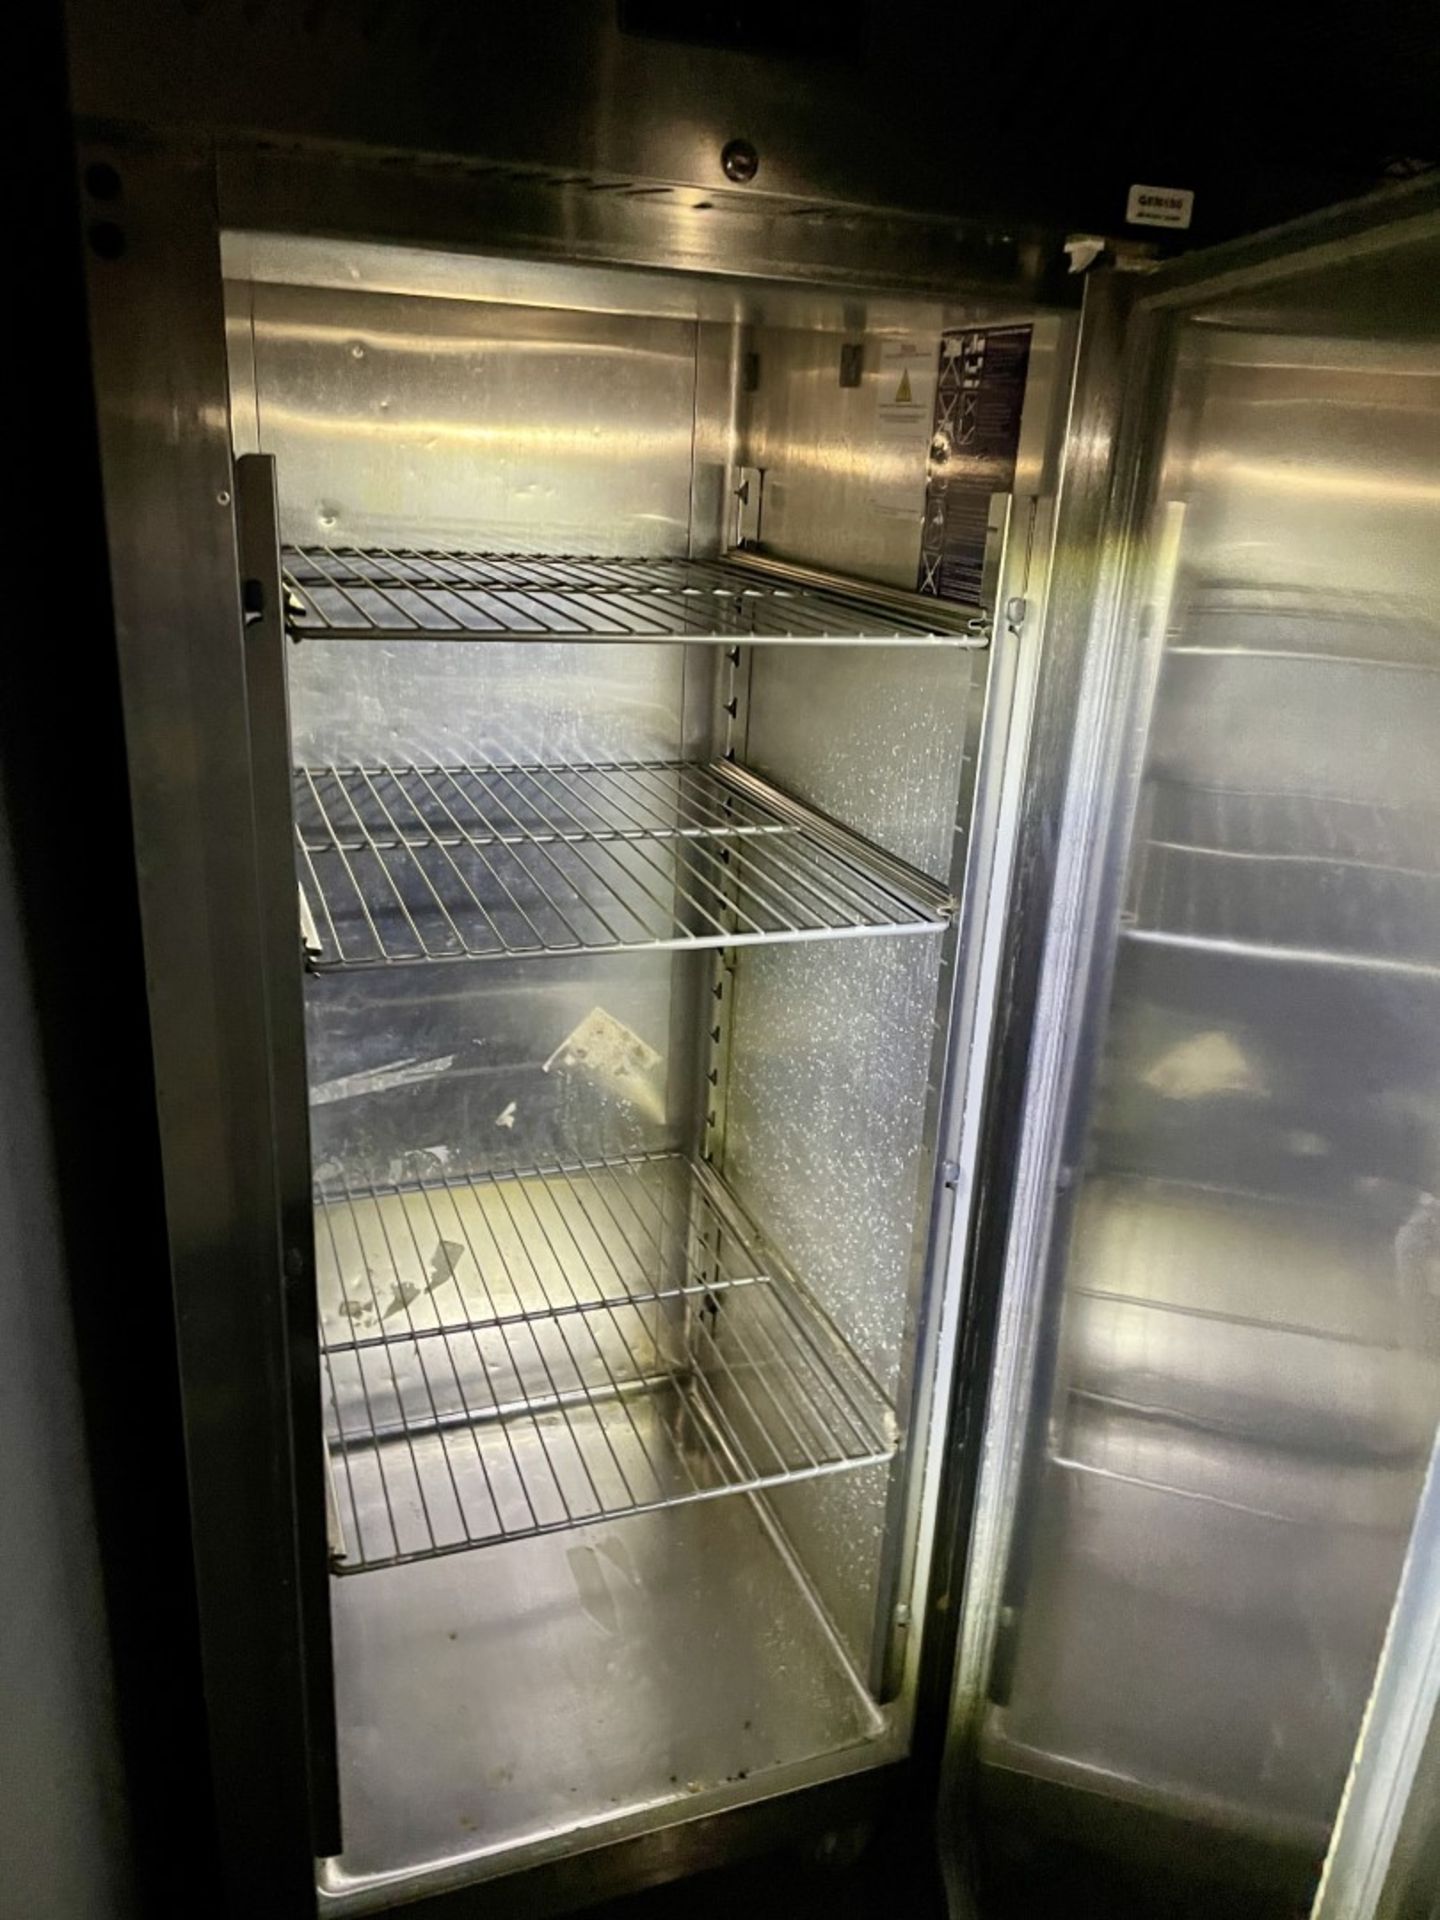 1 x Williams LJ1SA Upright Commercial Freezer With Stainless Steel Exterior - CL670 - Ref: - Image 7 of 7